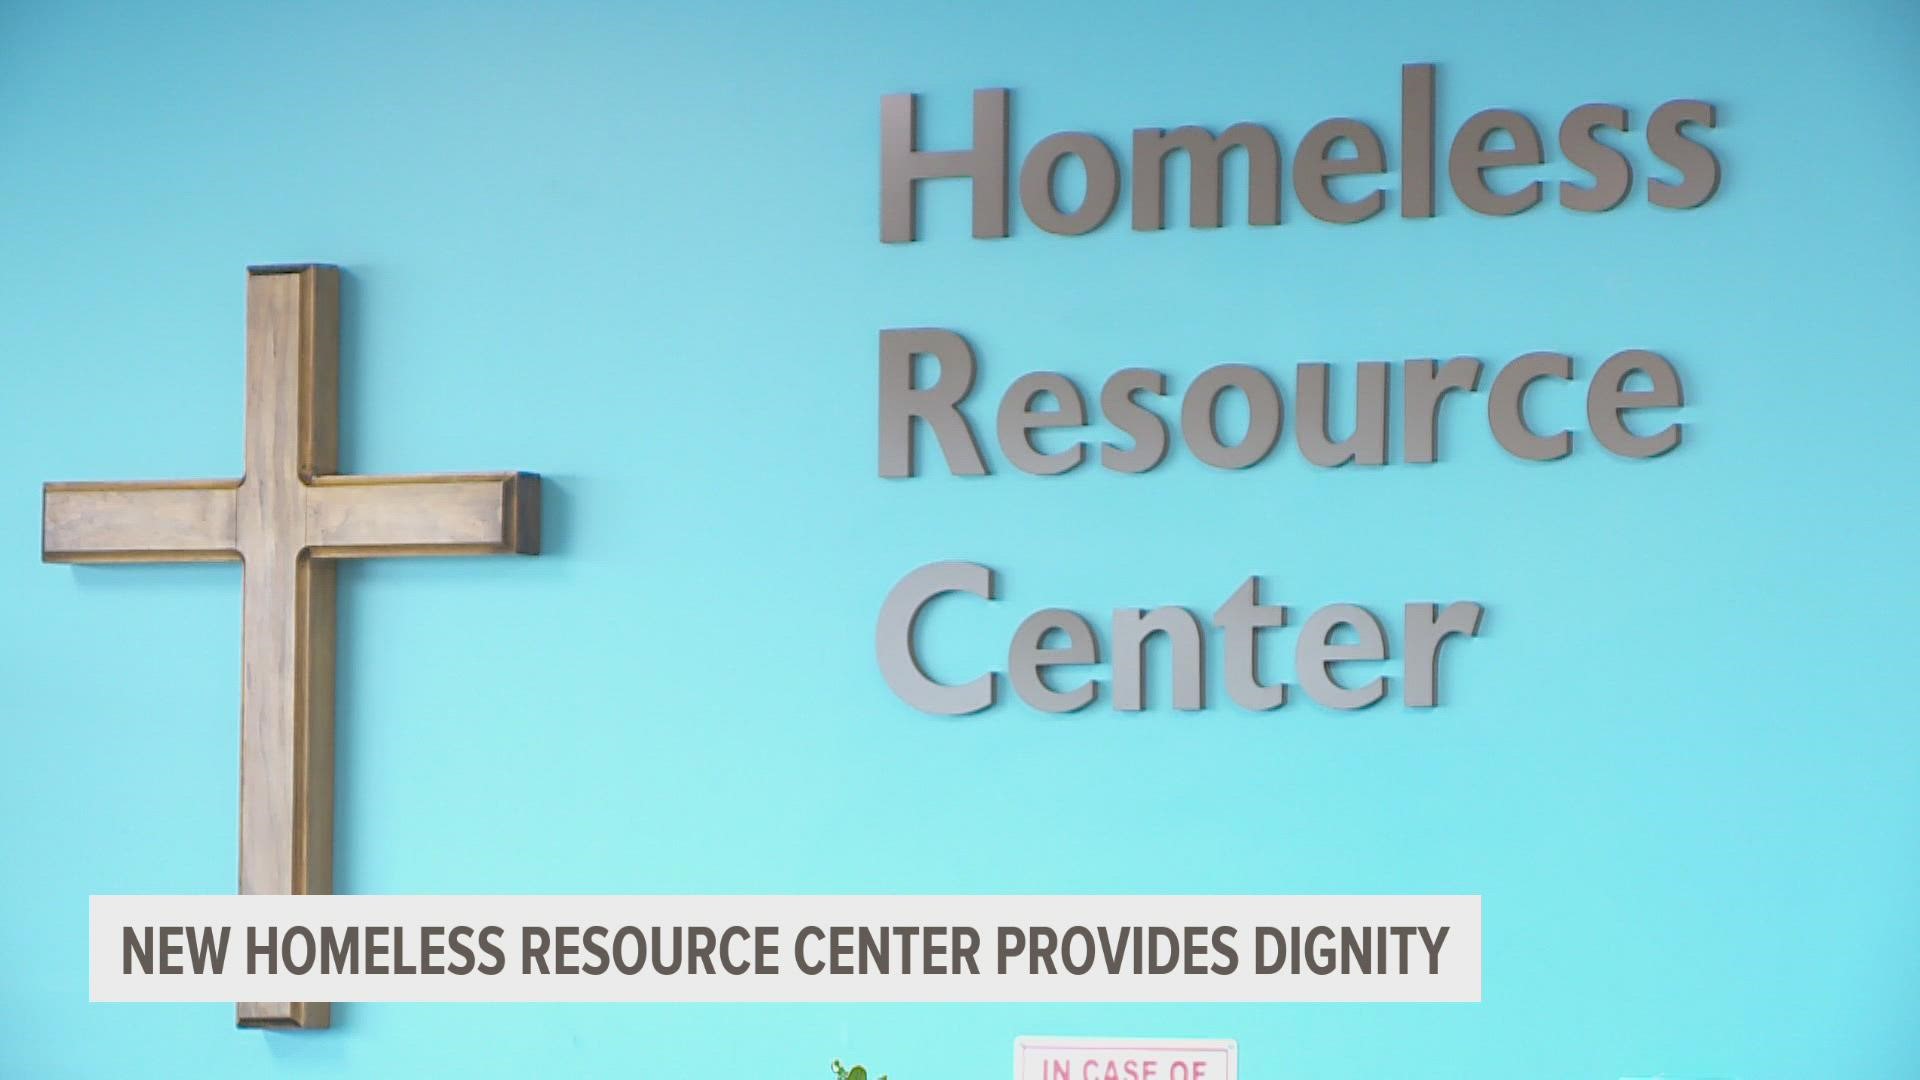 The facility is part of the many initiatives Joppa is taking to end homelessness in Iowa's largest county.